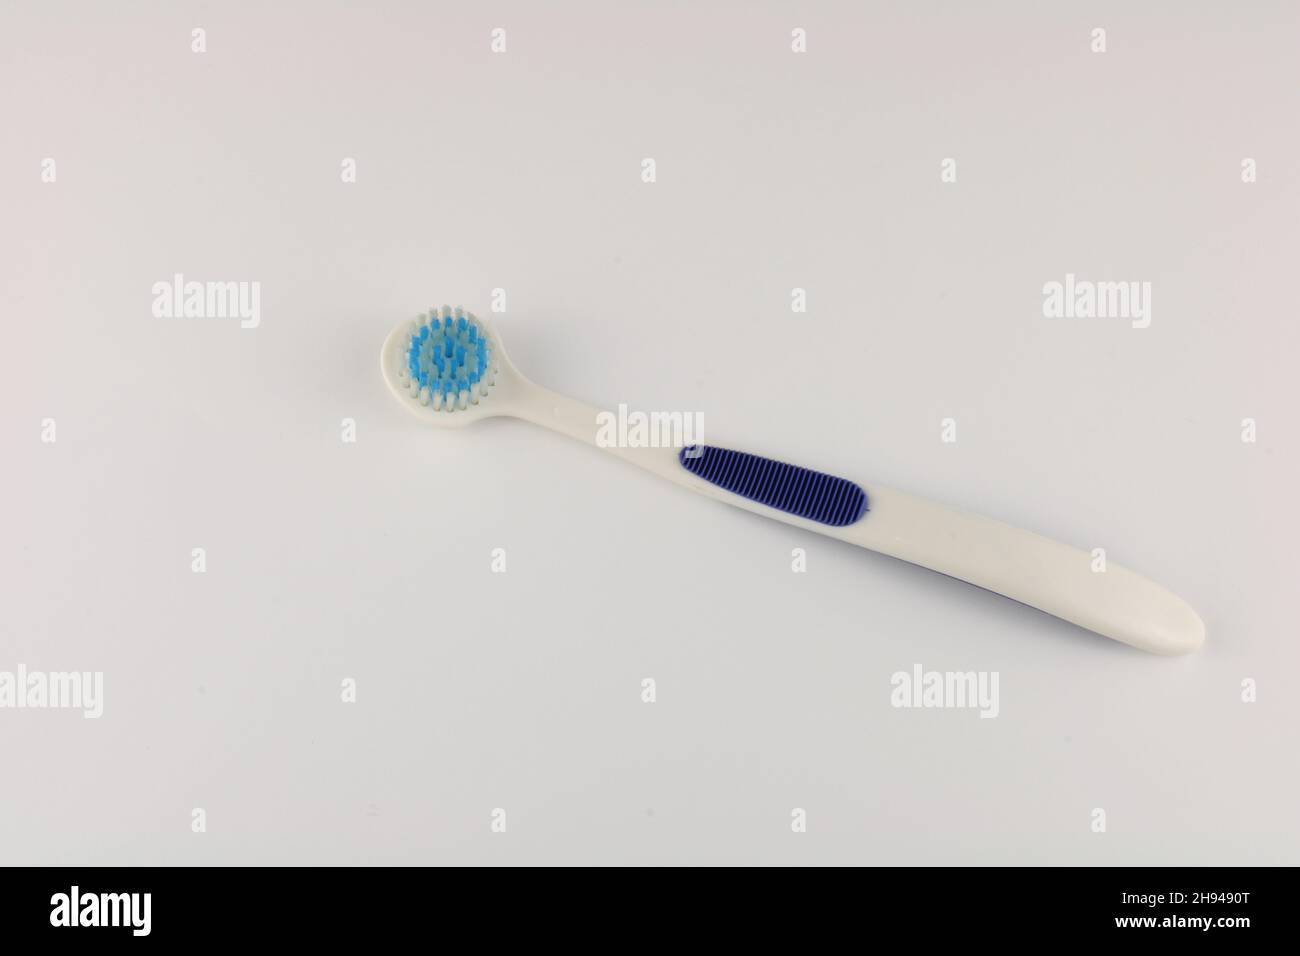 Tongue brush isolated on a plain background with copy space. Lingual papillae cleaning and oral hygiene concept Stock Photo